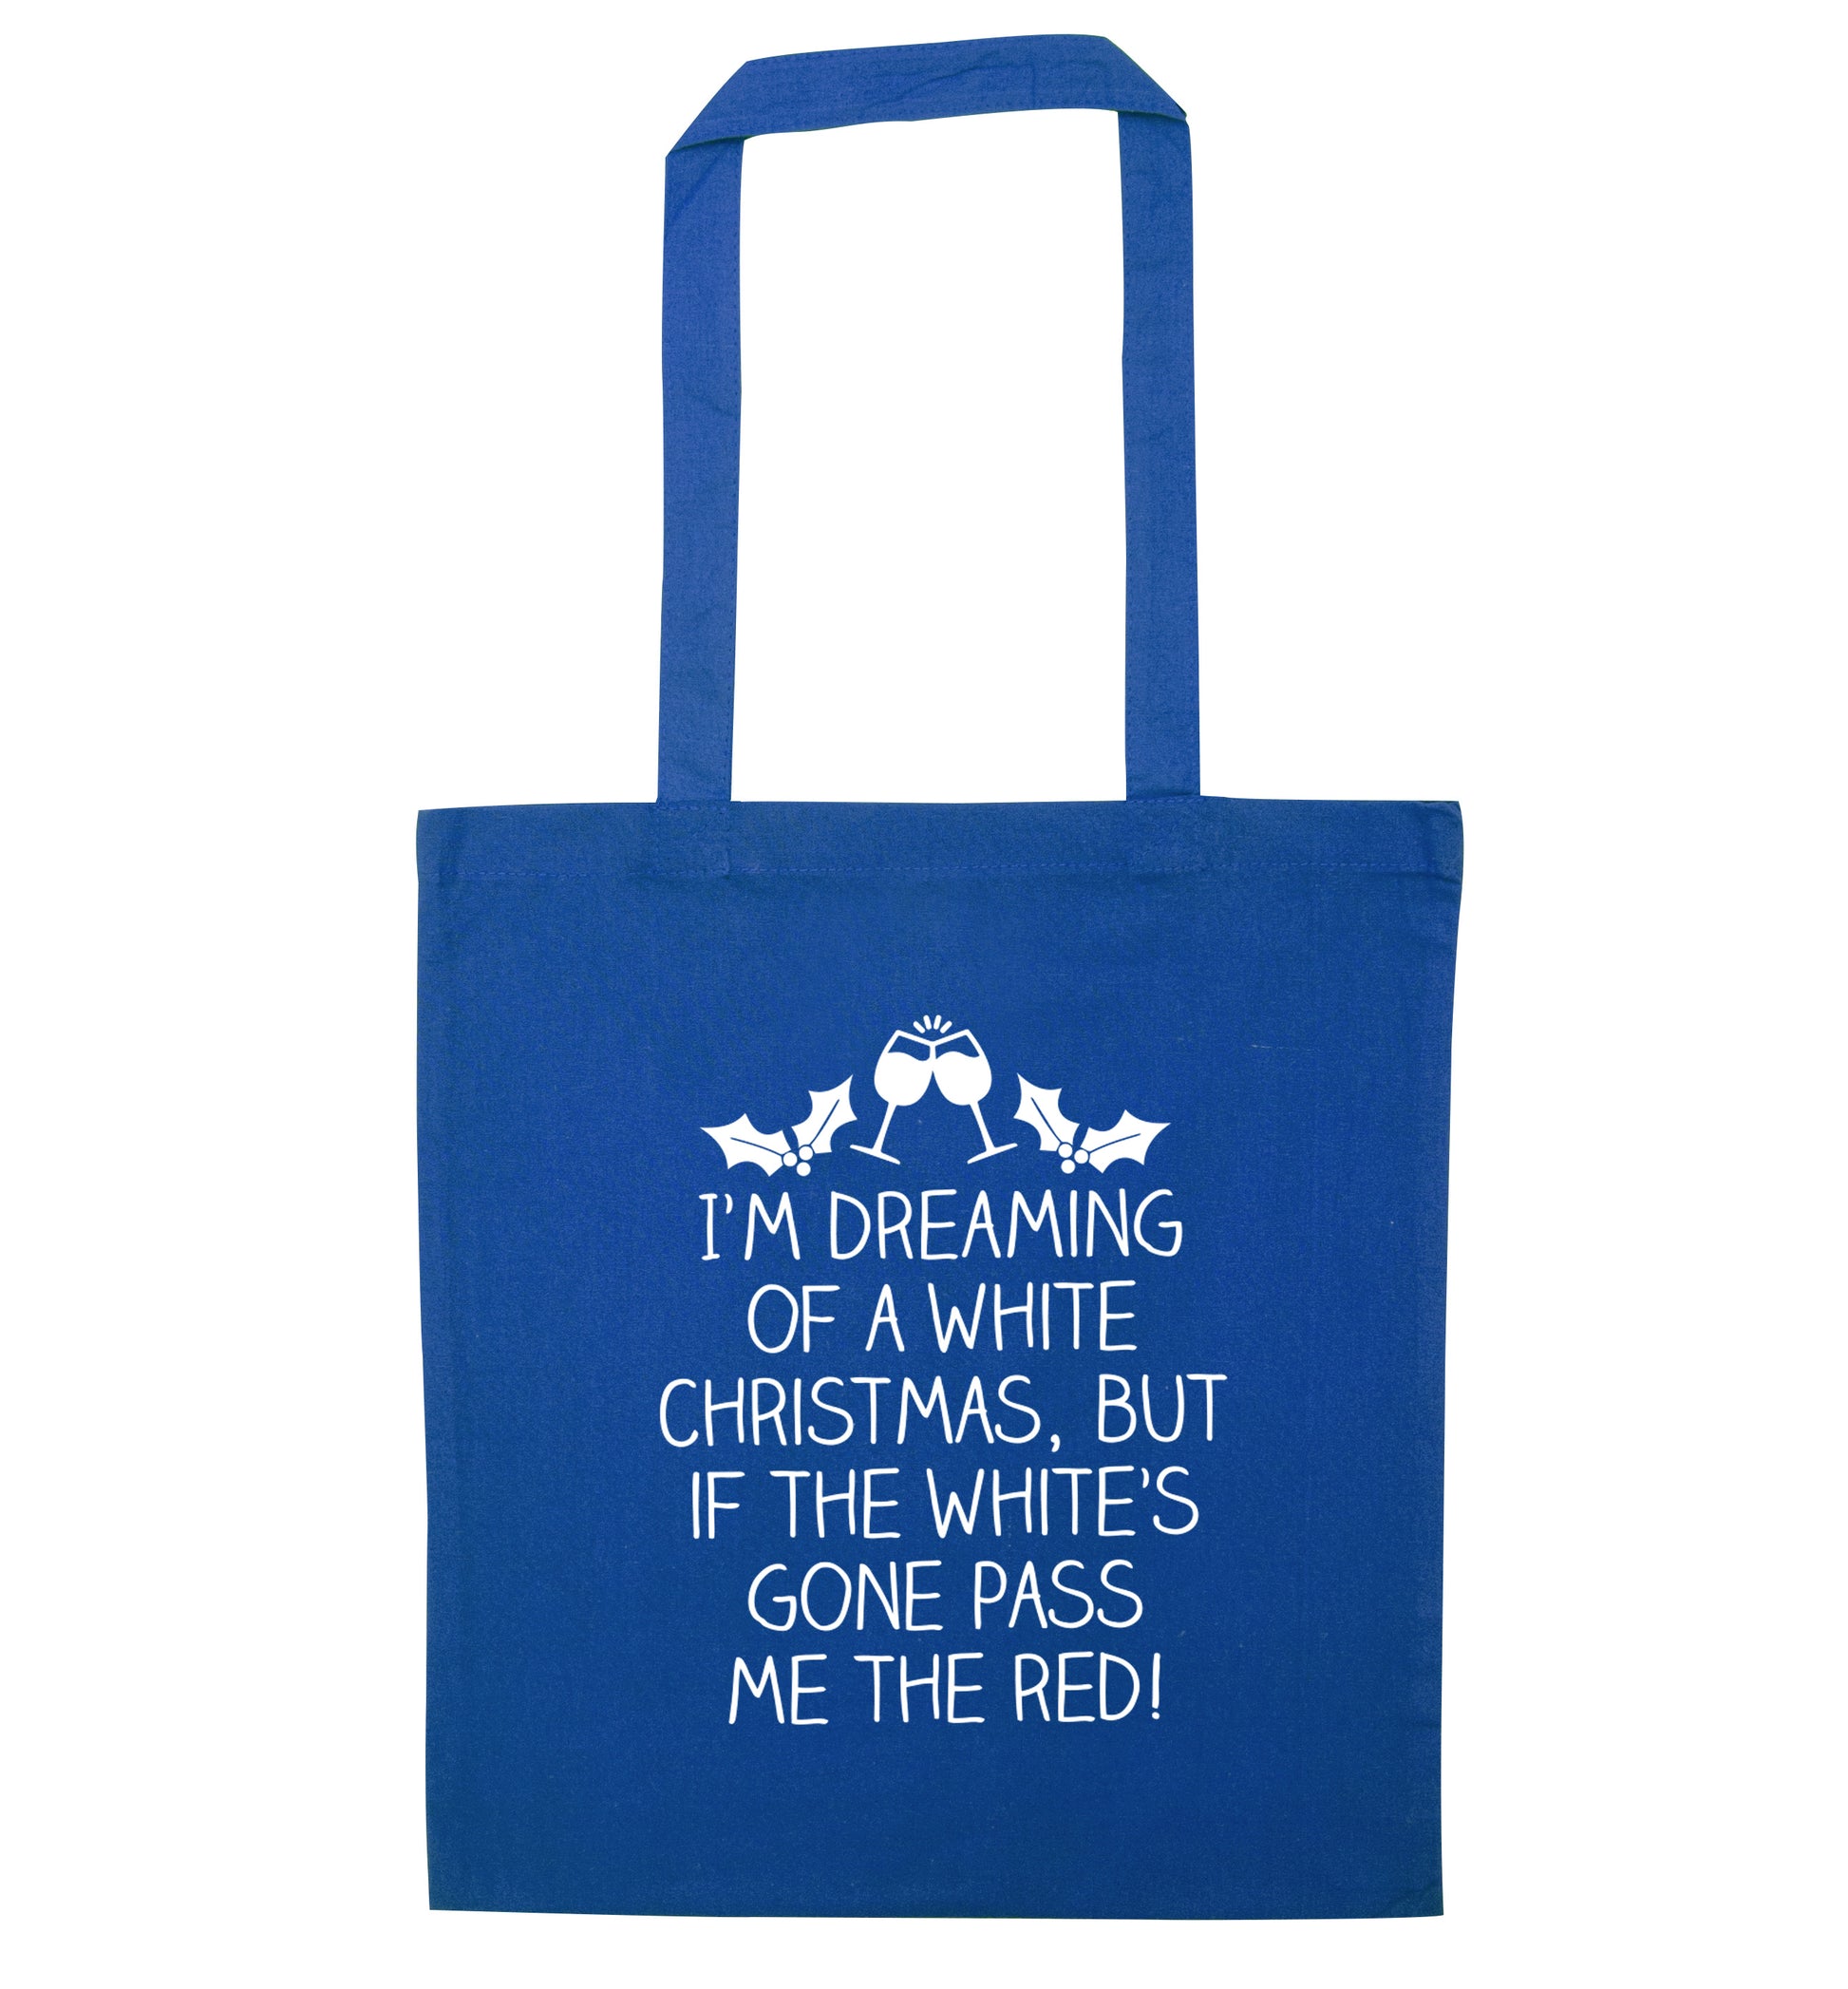 I'm dreaming of a white christmas, but if the white's gone pass me the red! blue tote bag